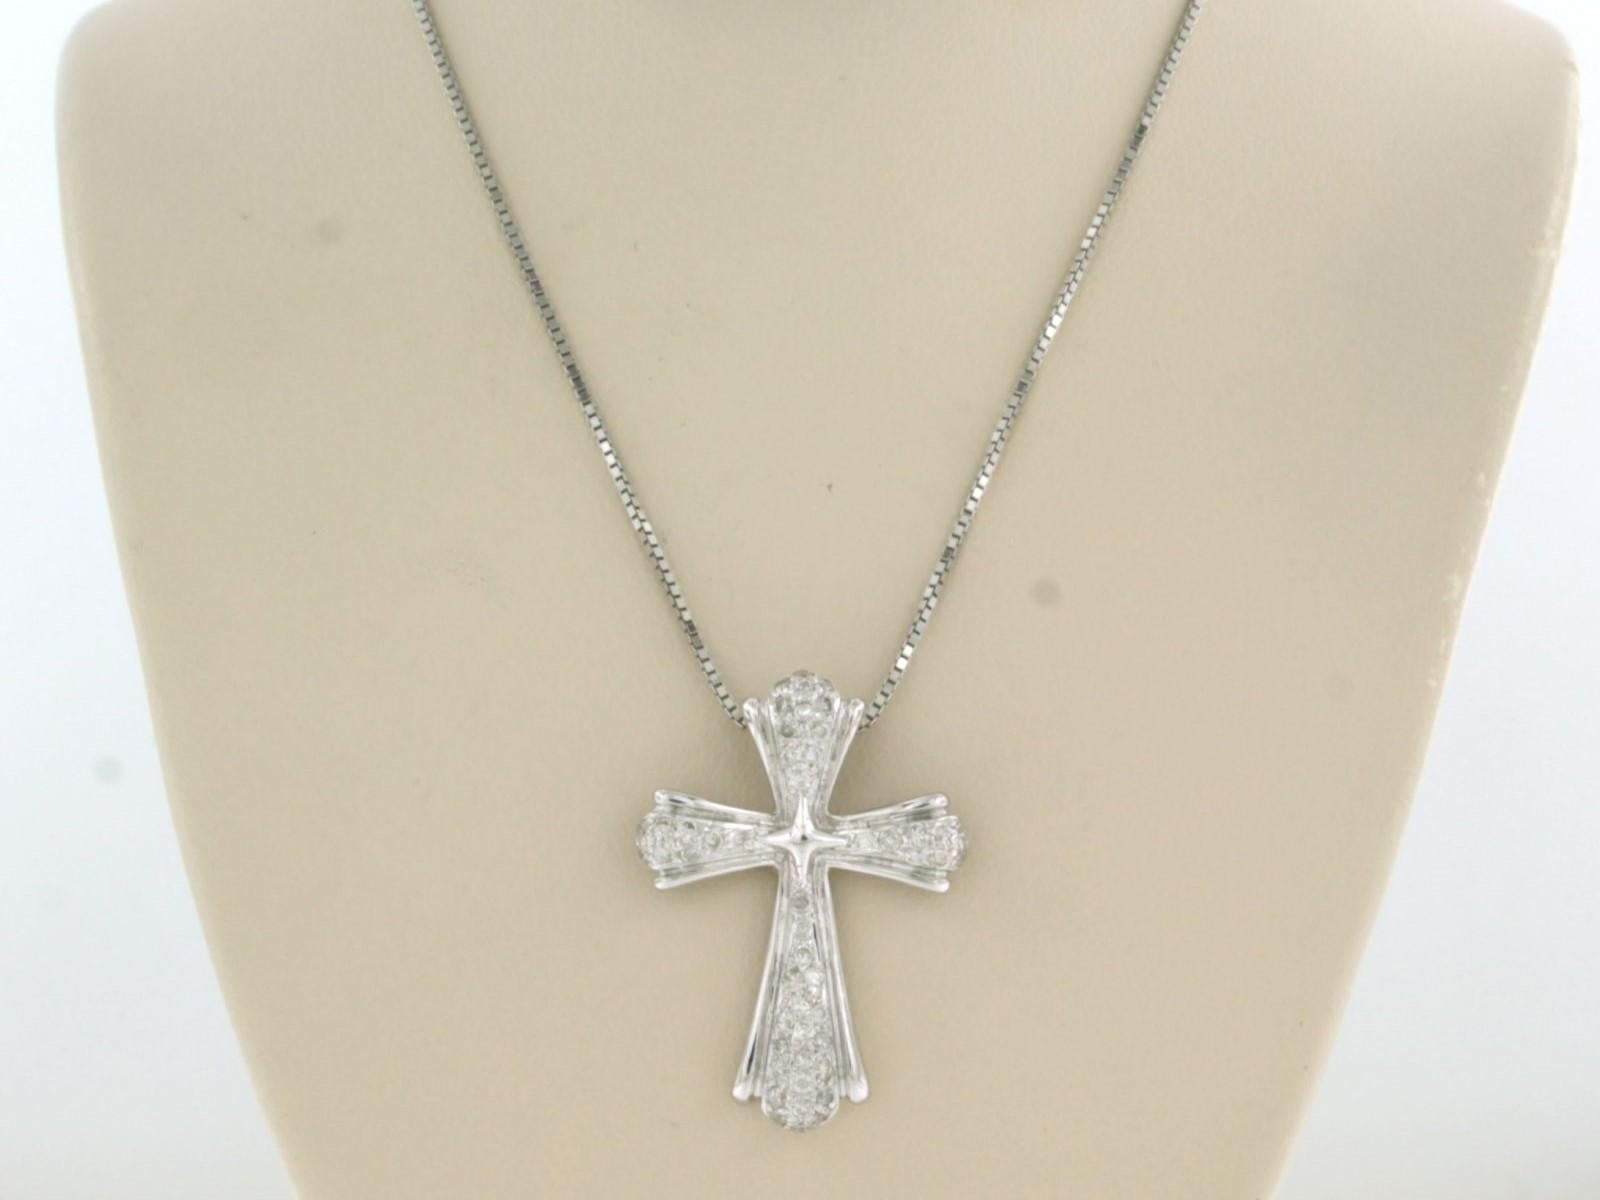 18k white gold necklace with a cross pendant set with brilliant cut diamonds. 0.50ct - F/G - piq. - 42 cm long

detailed description:

necklace is 42 cm long and 0.8 mm wide

size of the pendant is approximately 2.7 cm long by 2.0 cm wide

total